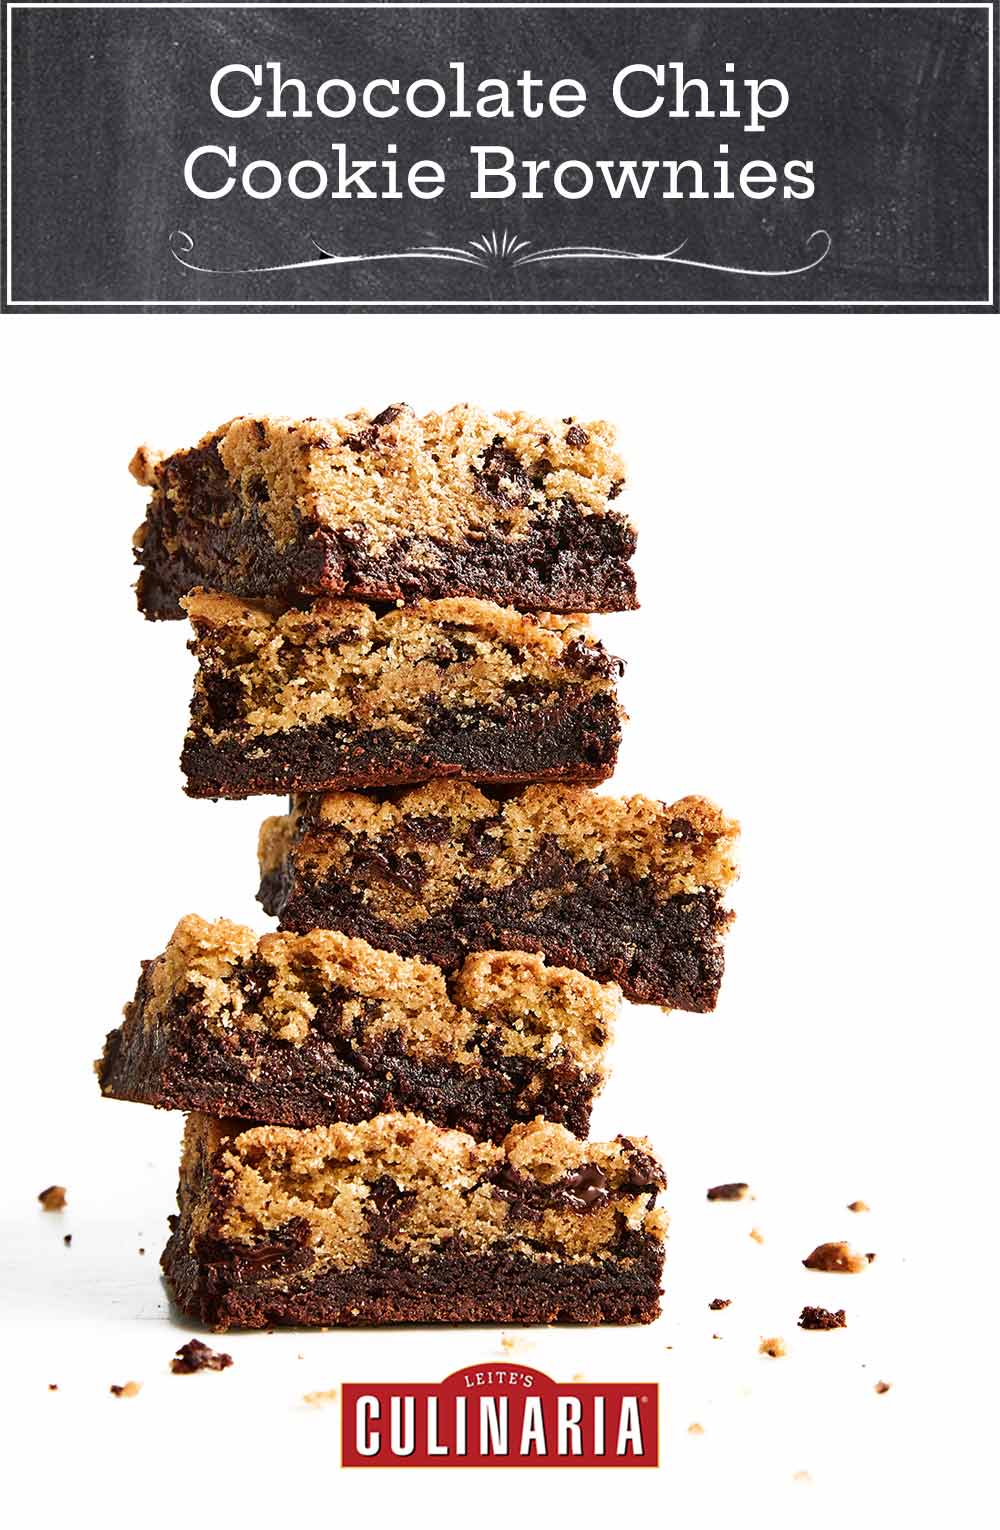 A stack of five chocolate chip cookie brownies.